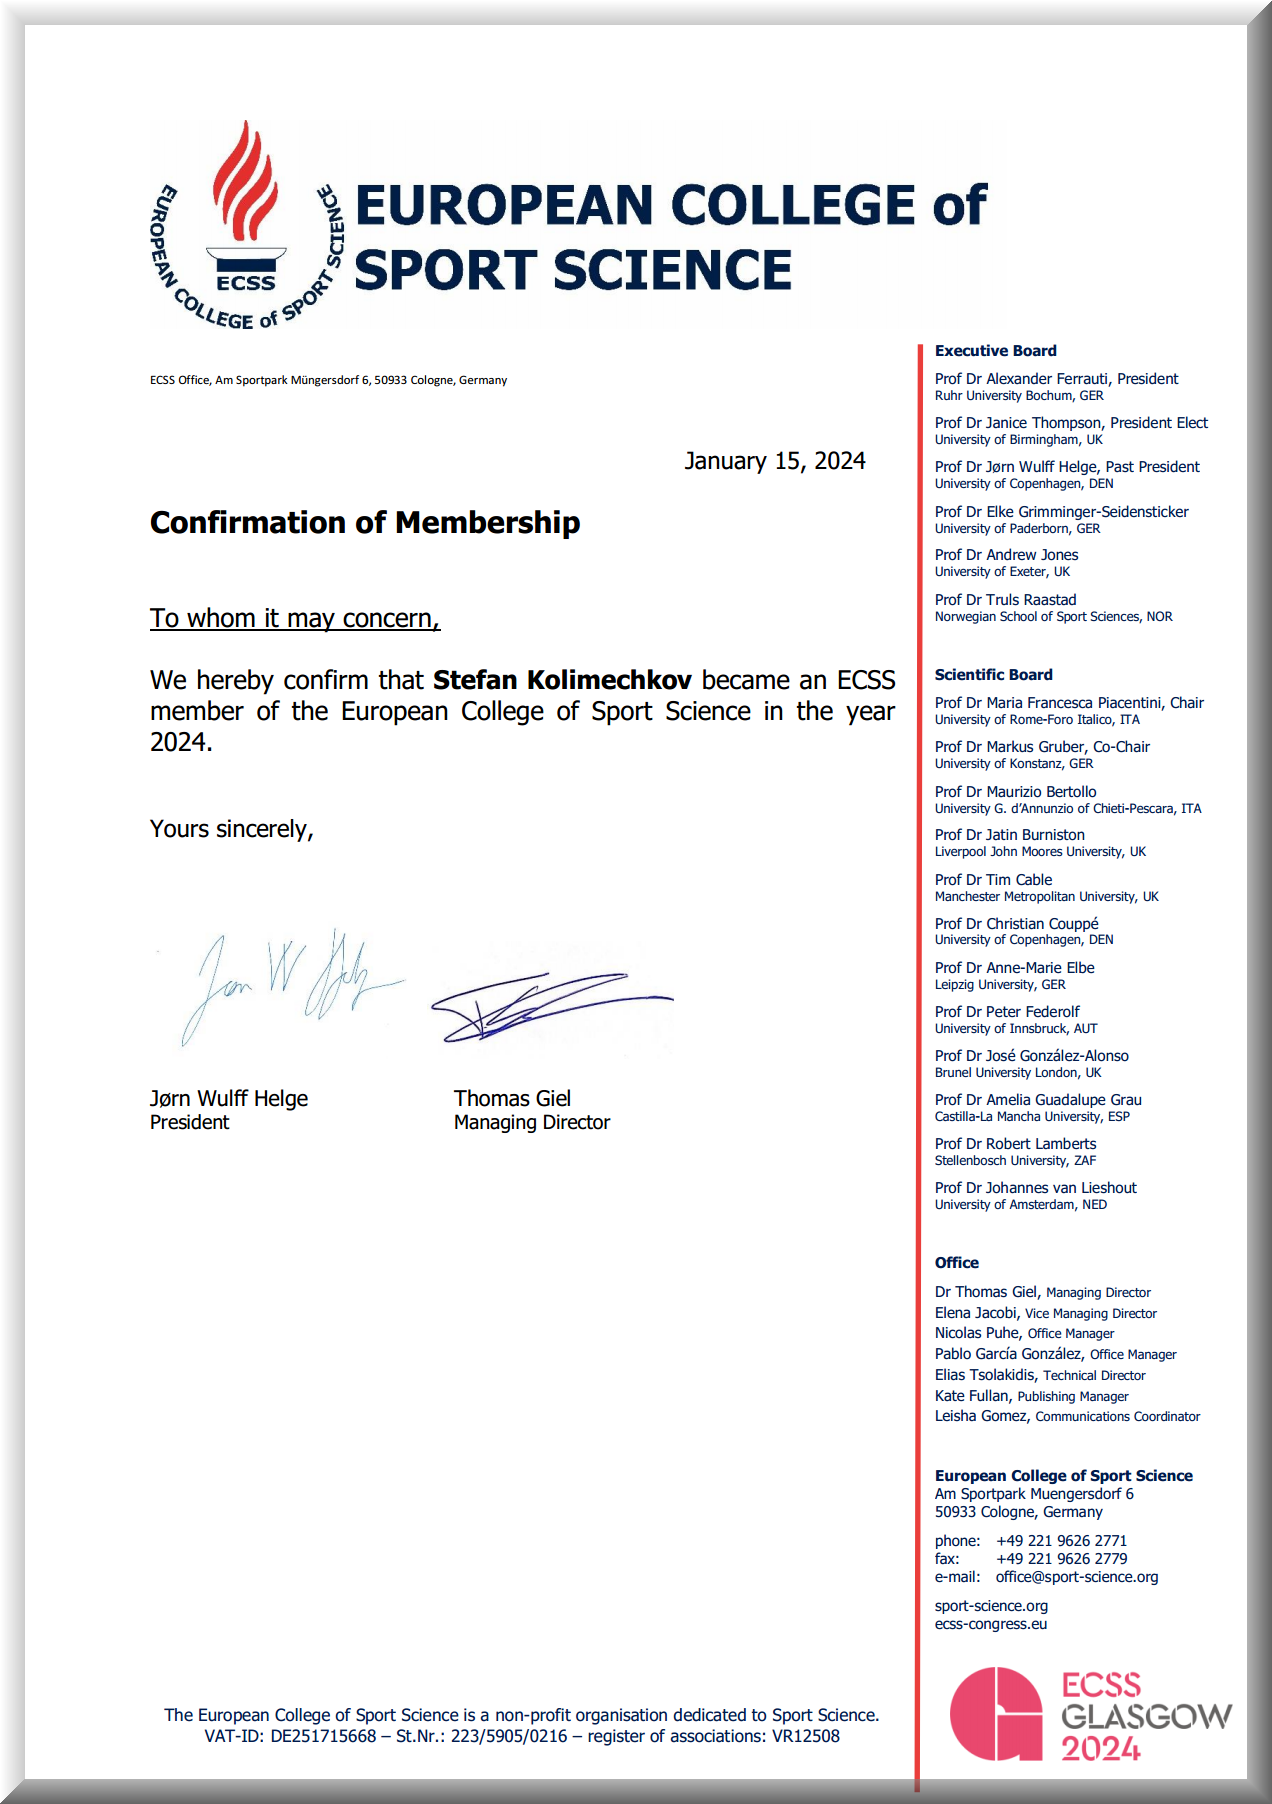 Dr Kolimechkov is a member of the European College of Sport Science